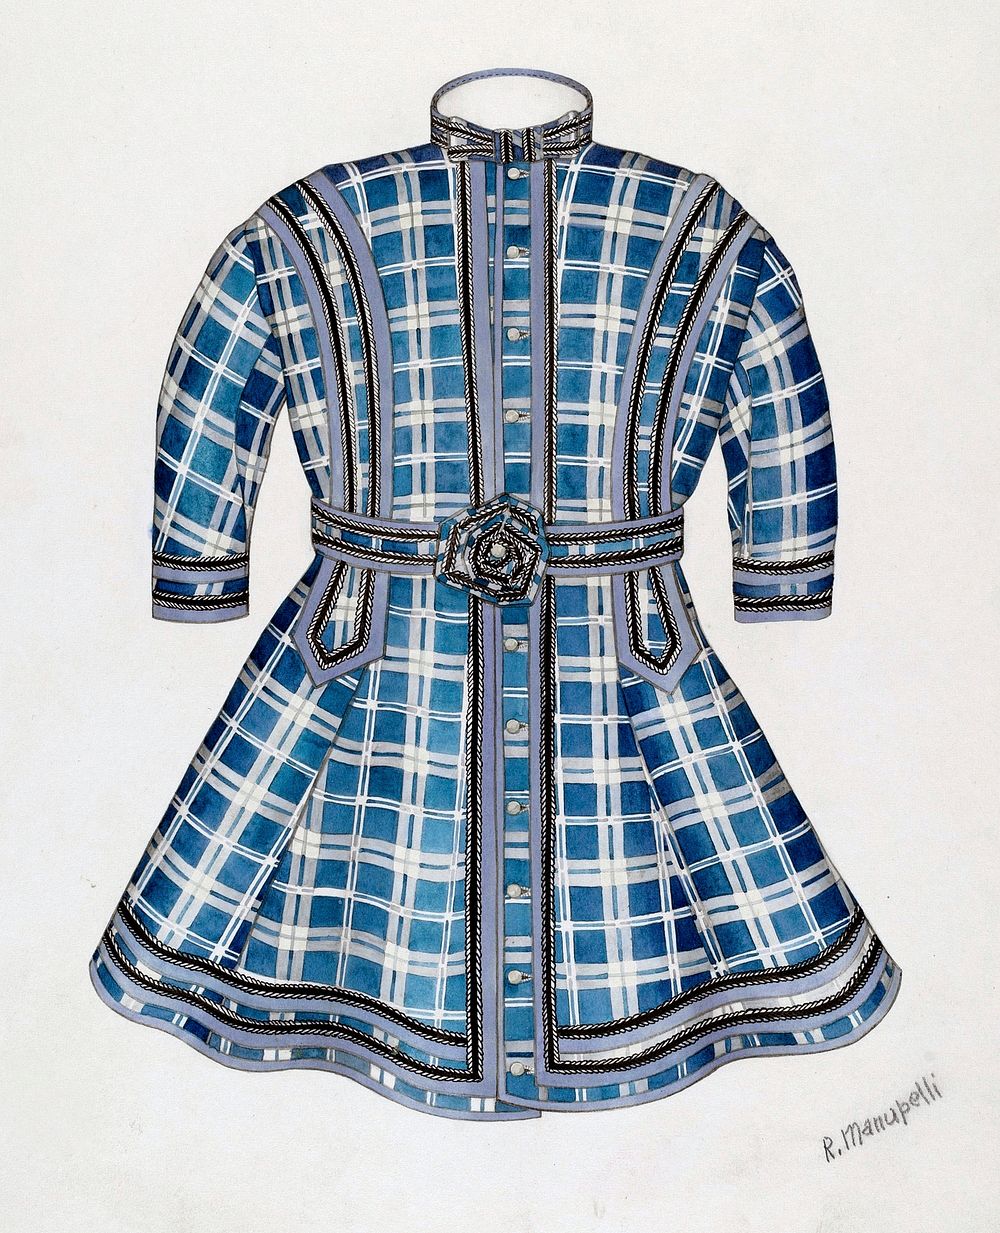 Child's Dress (c. 1938) by Raymond Manupelli. Original from The National Gallery of Art. Digitally enhanced by rawpixel.